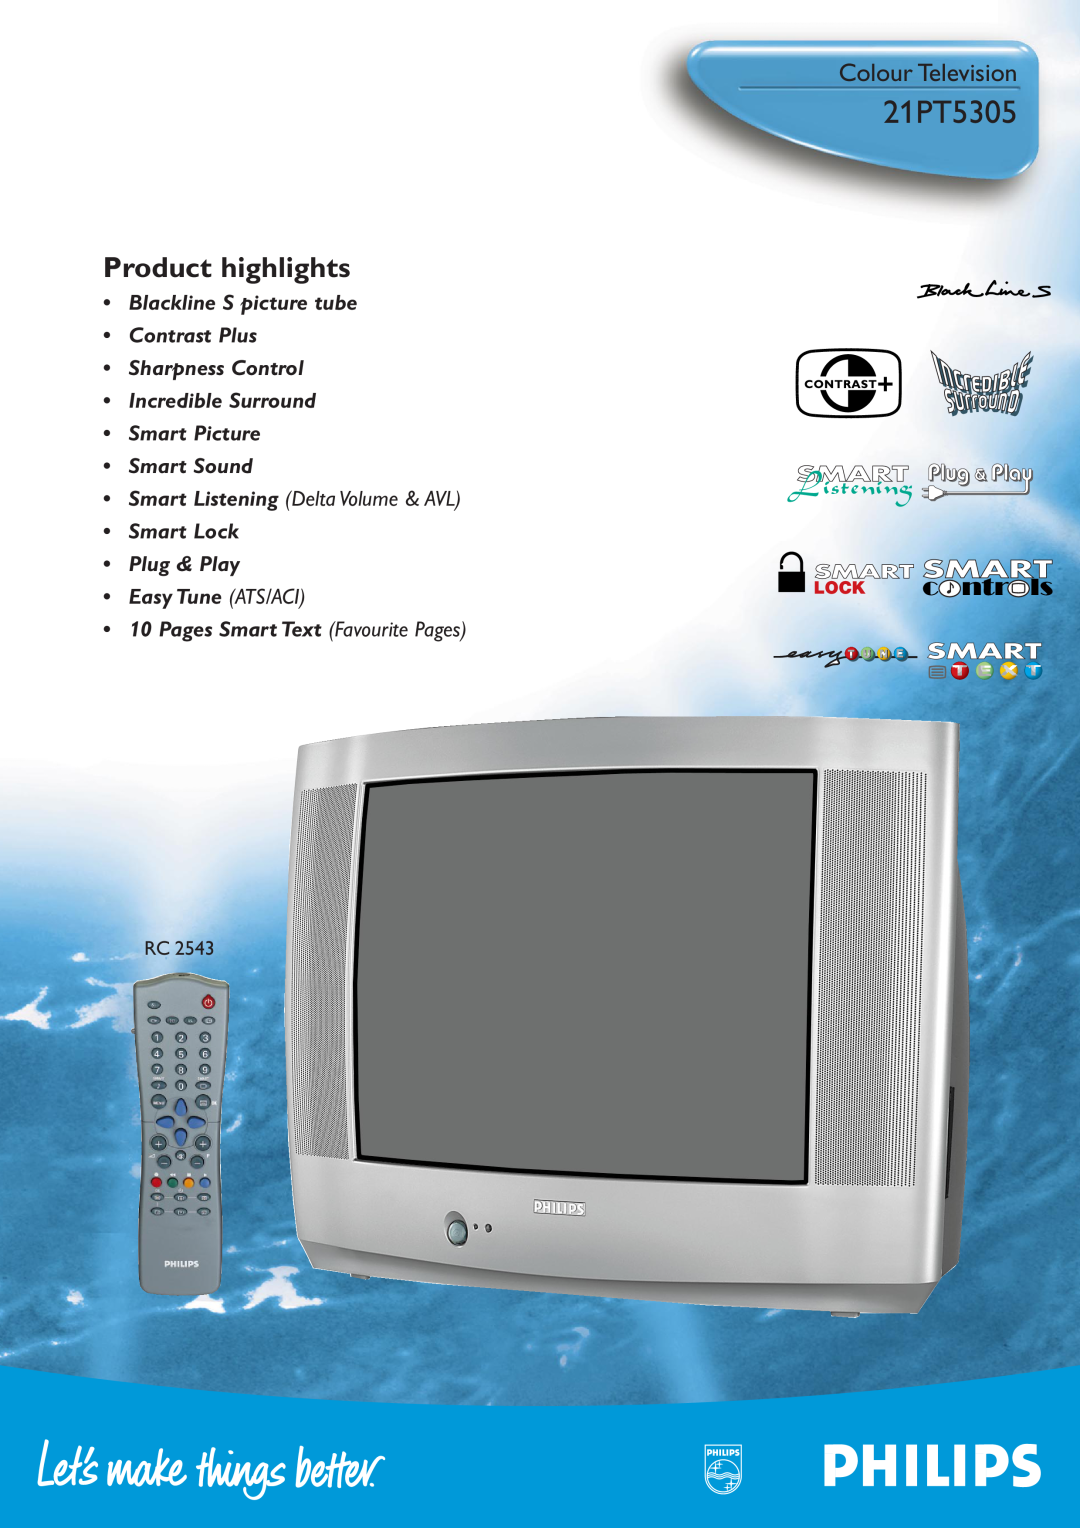 Philips 21PT5305 manual Colour Television, Product highlights, Blackline S picture tube Contrast Plus Sharpness Control 